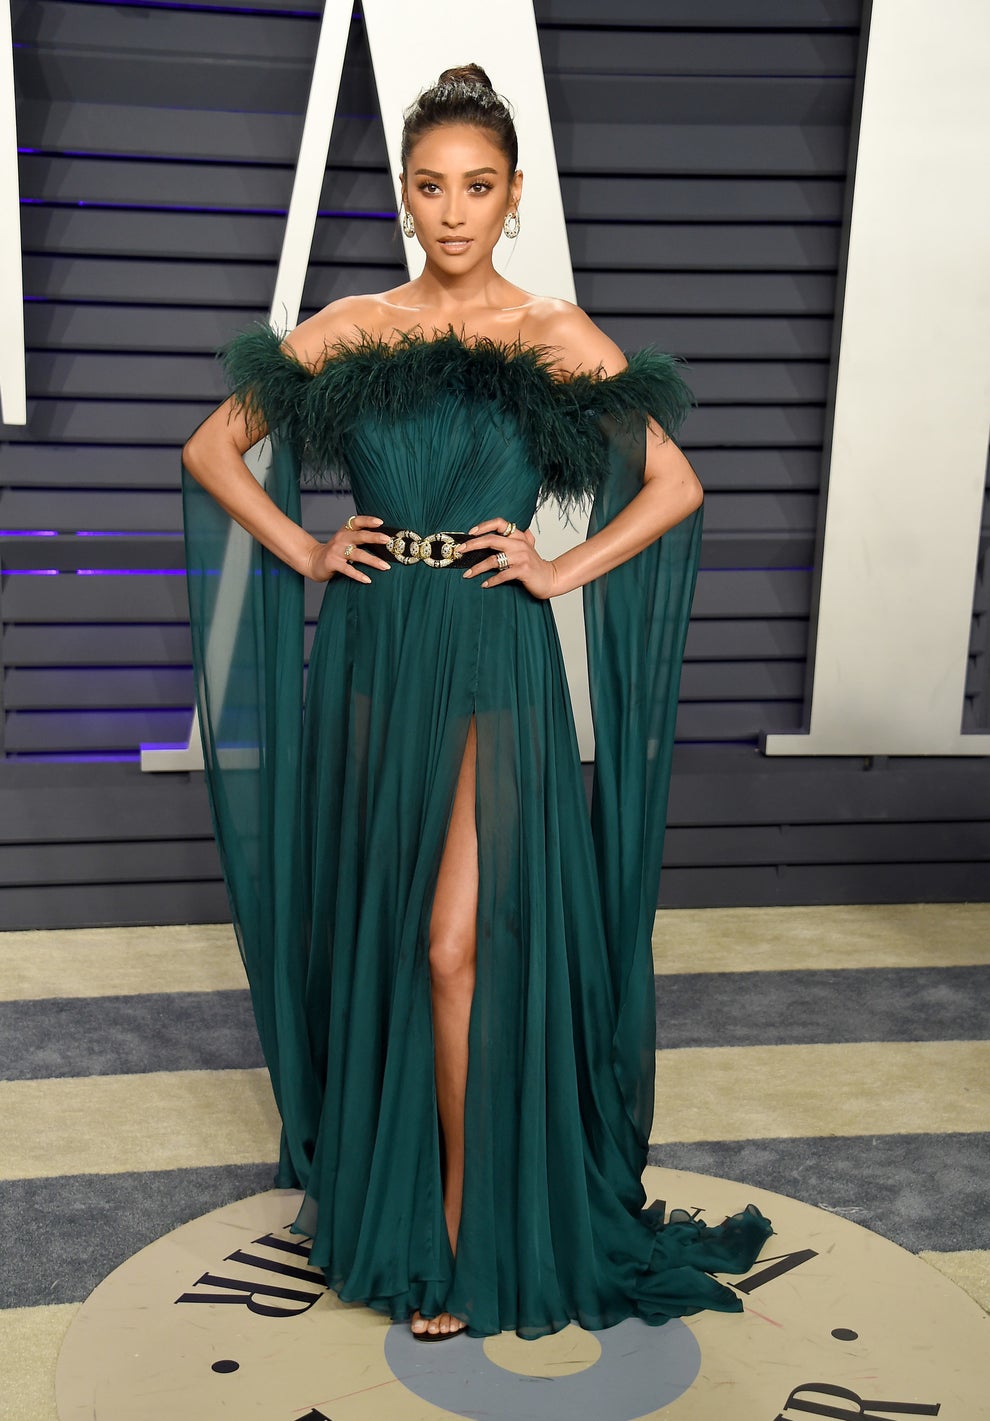 Here Are All The Looks From The 2019 Vanity Fair Oscar After Party